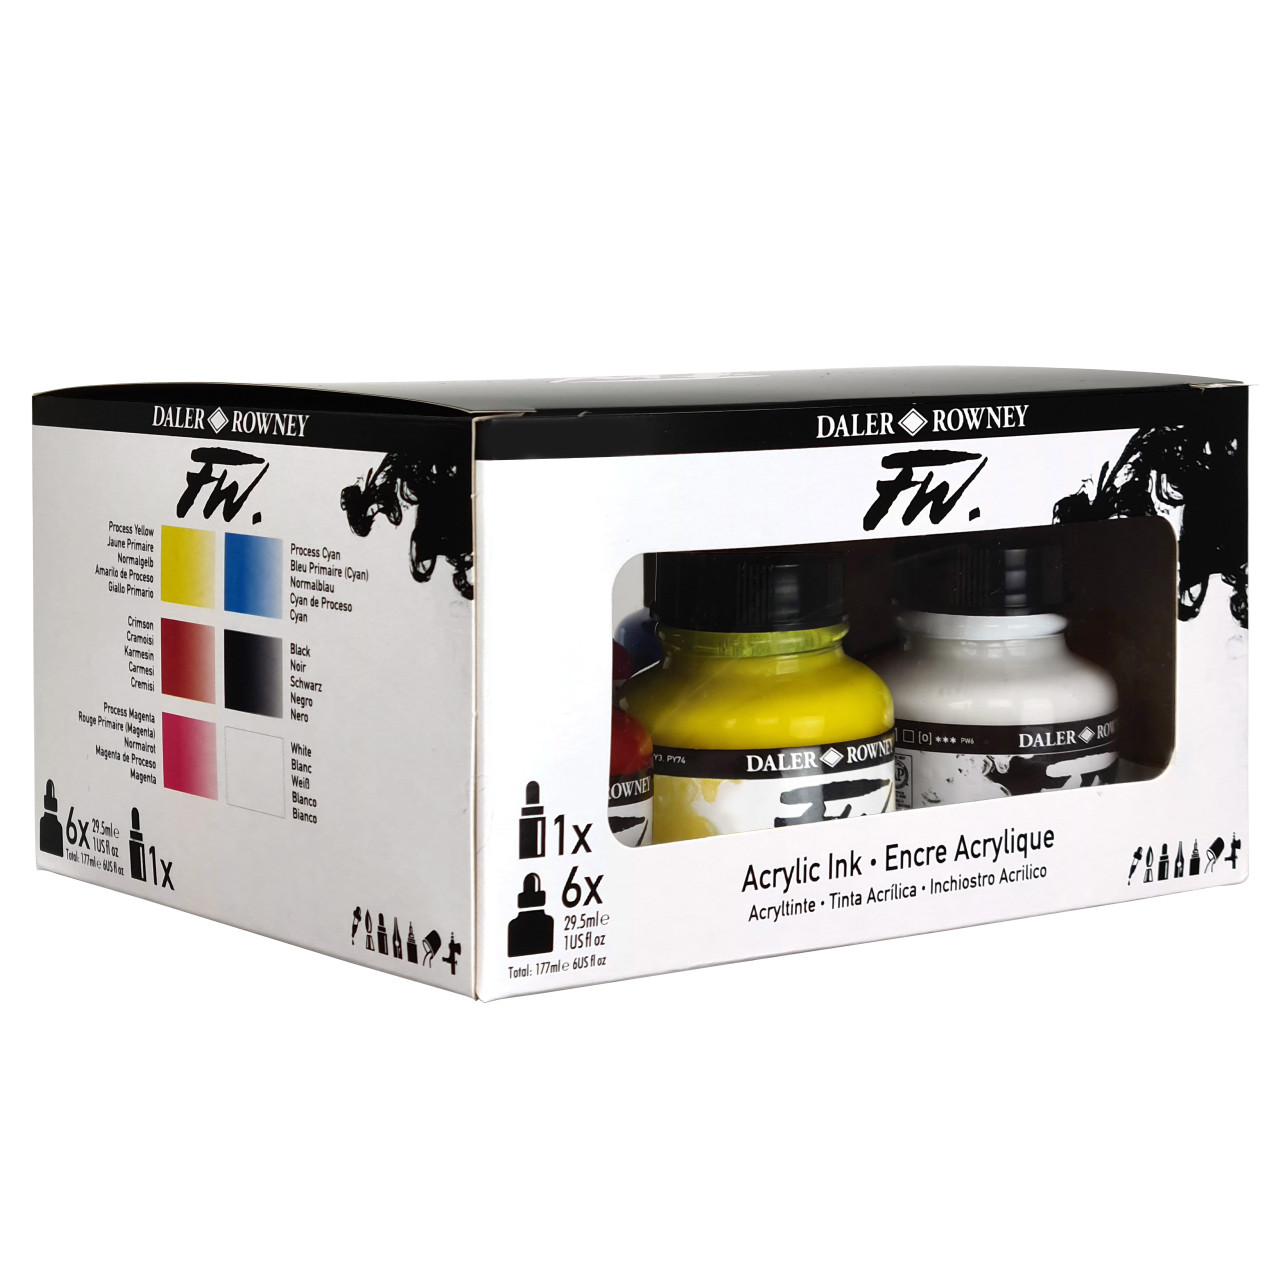 DalerRowney FW Acrylic WaterResistant Artists Inks and Sets